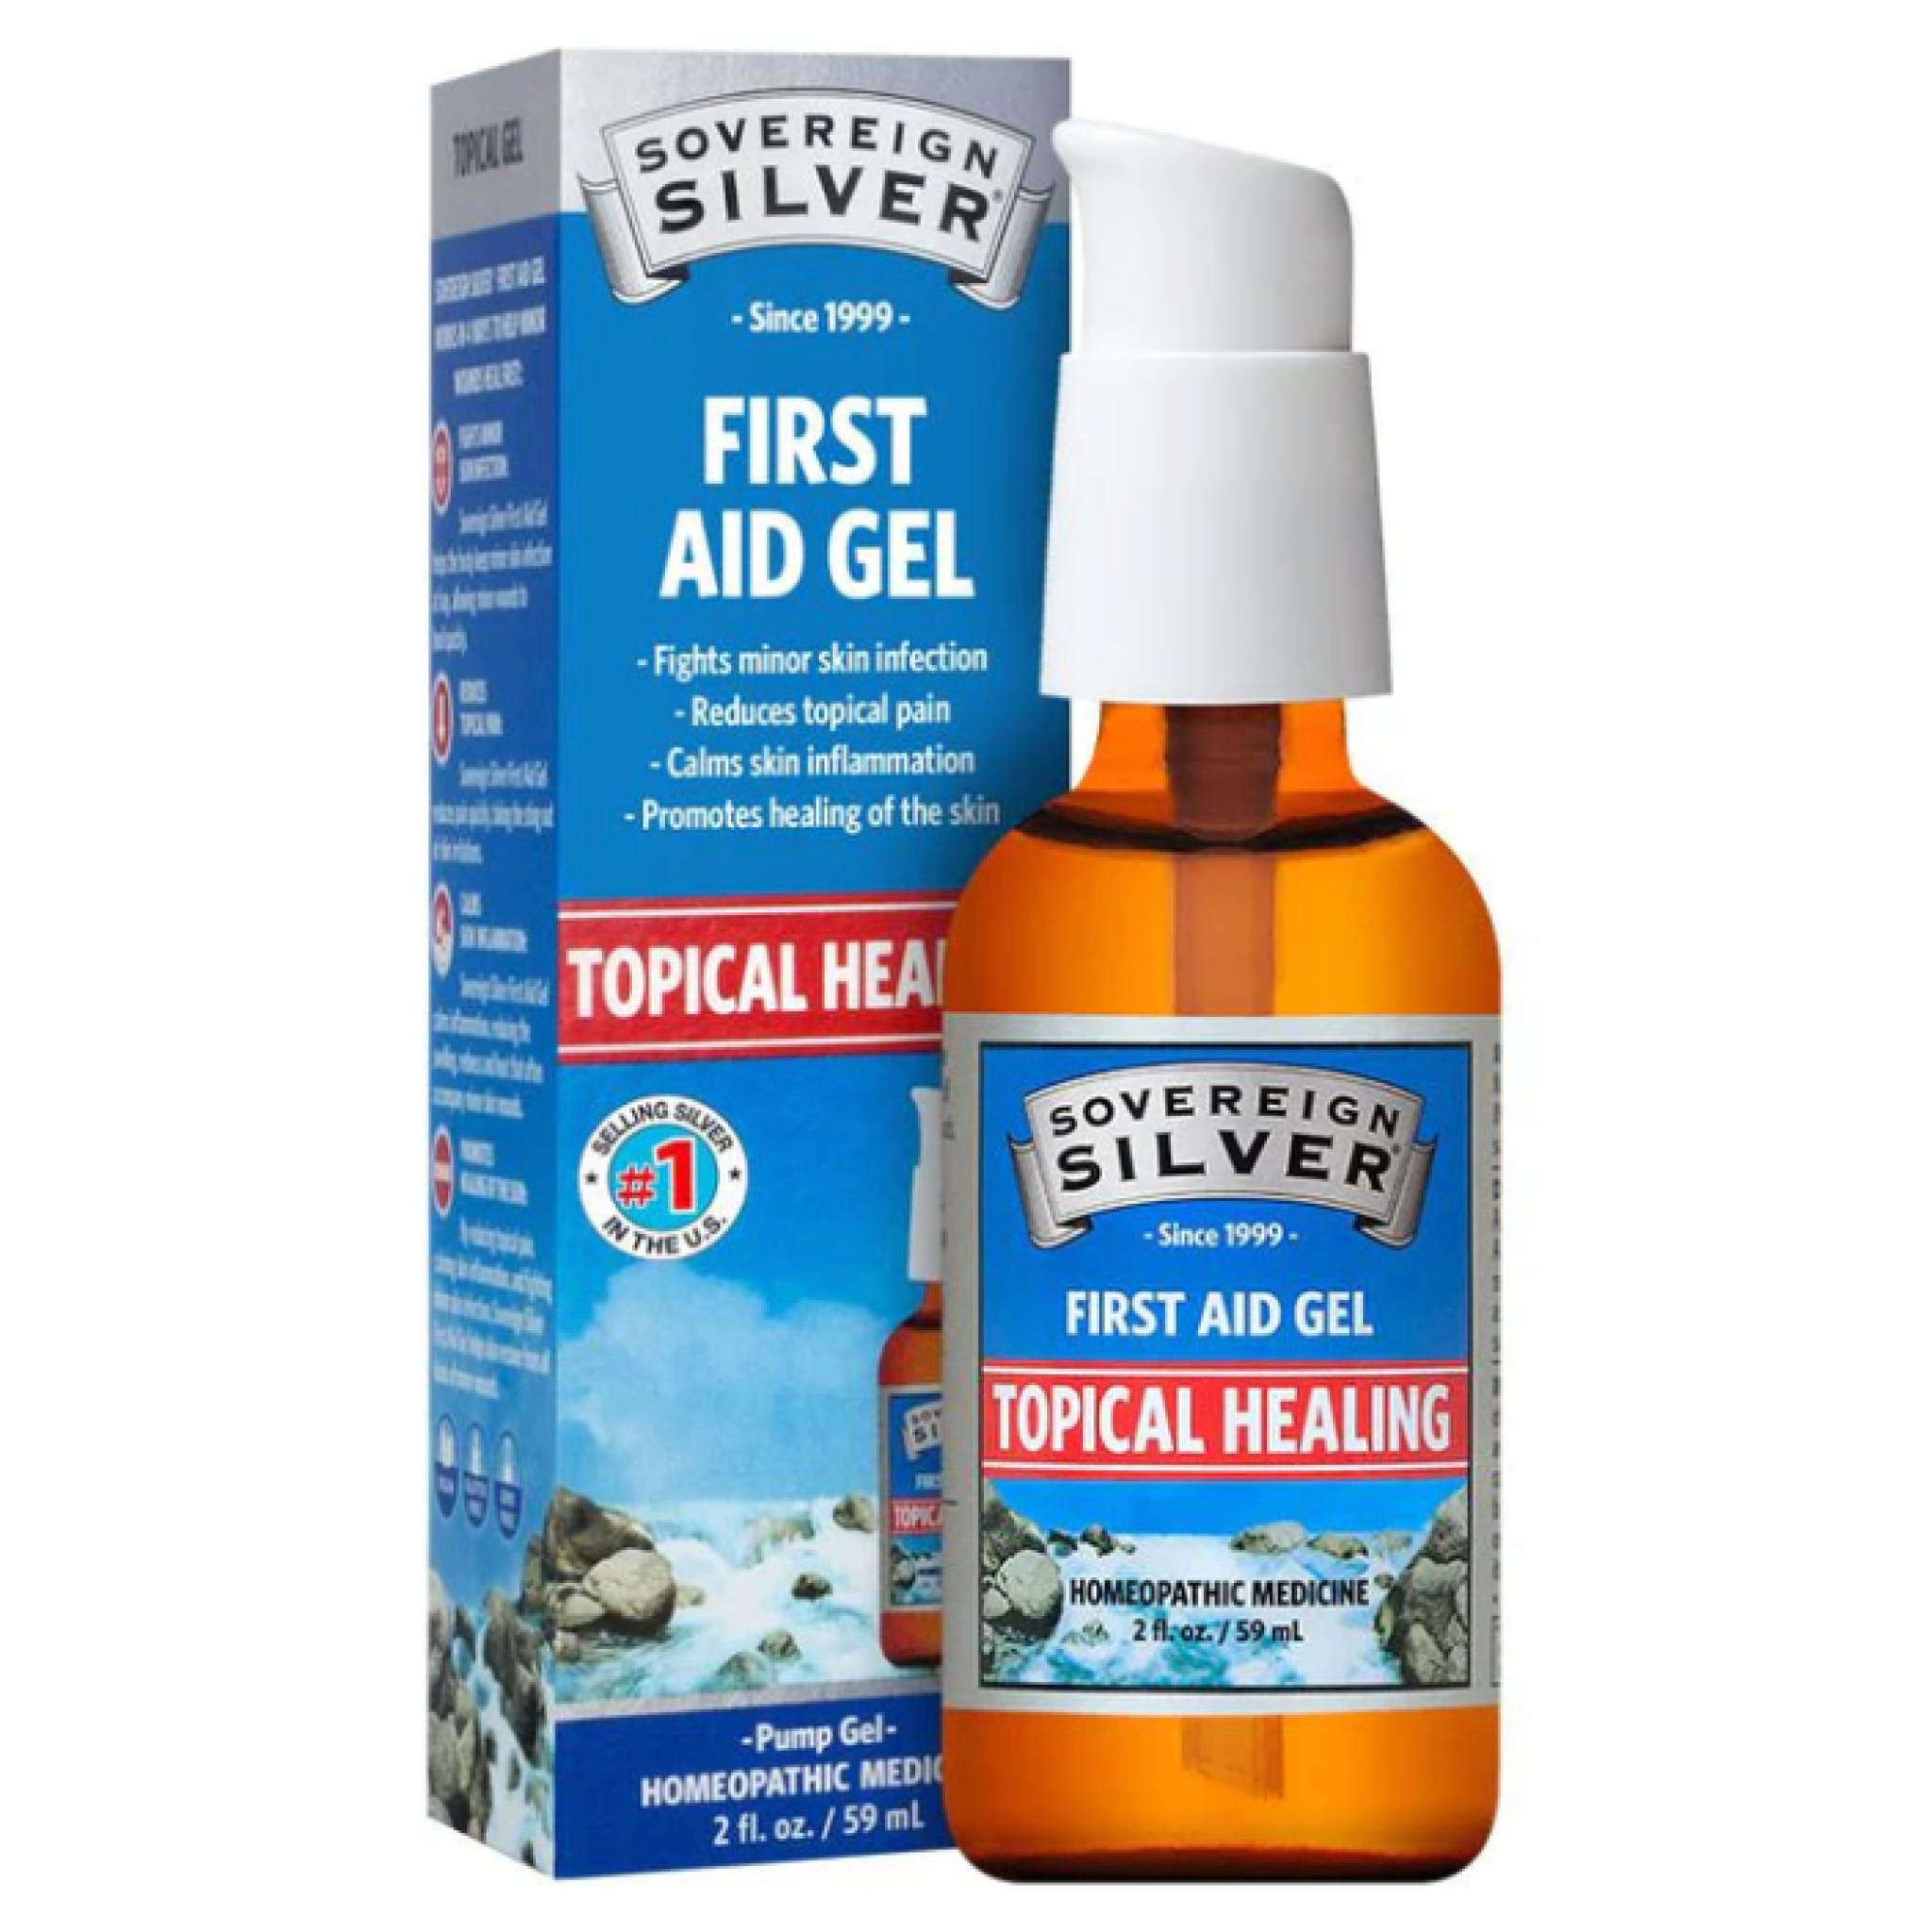 Sovereign Silver - Silver Sovereign First Aid Gel